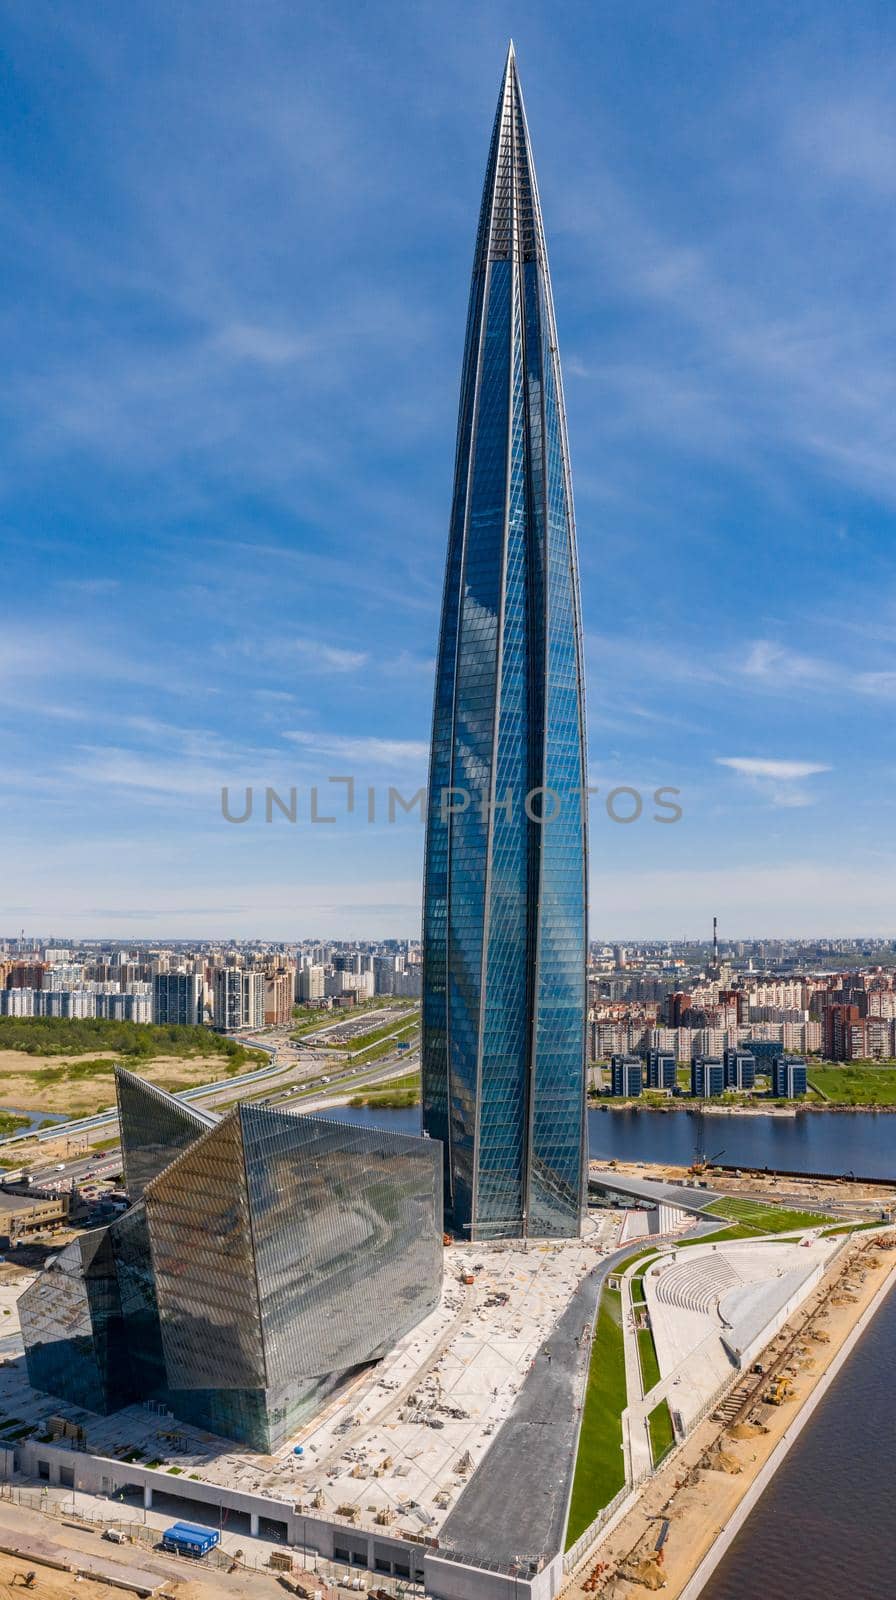 Russia, St.Petersburg, 26 May 2020: Aerial panoramic image of skyscraper Lakhta center at day time, It is the highest skyscraper in Europe, completion of construction by vladimirdrozdin